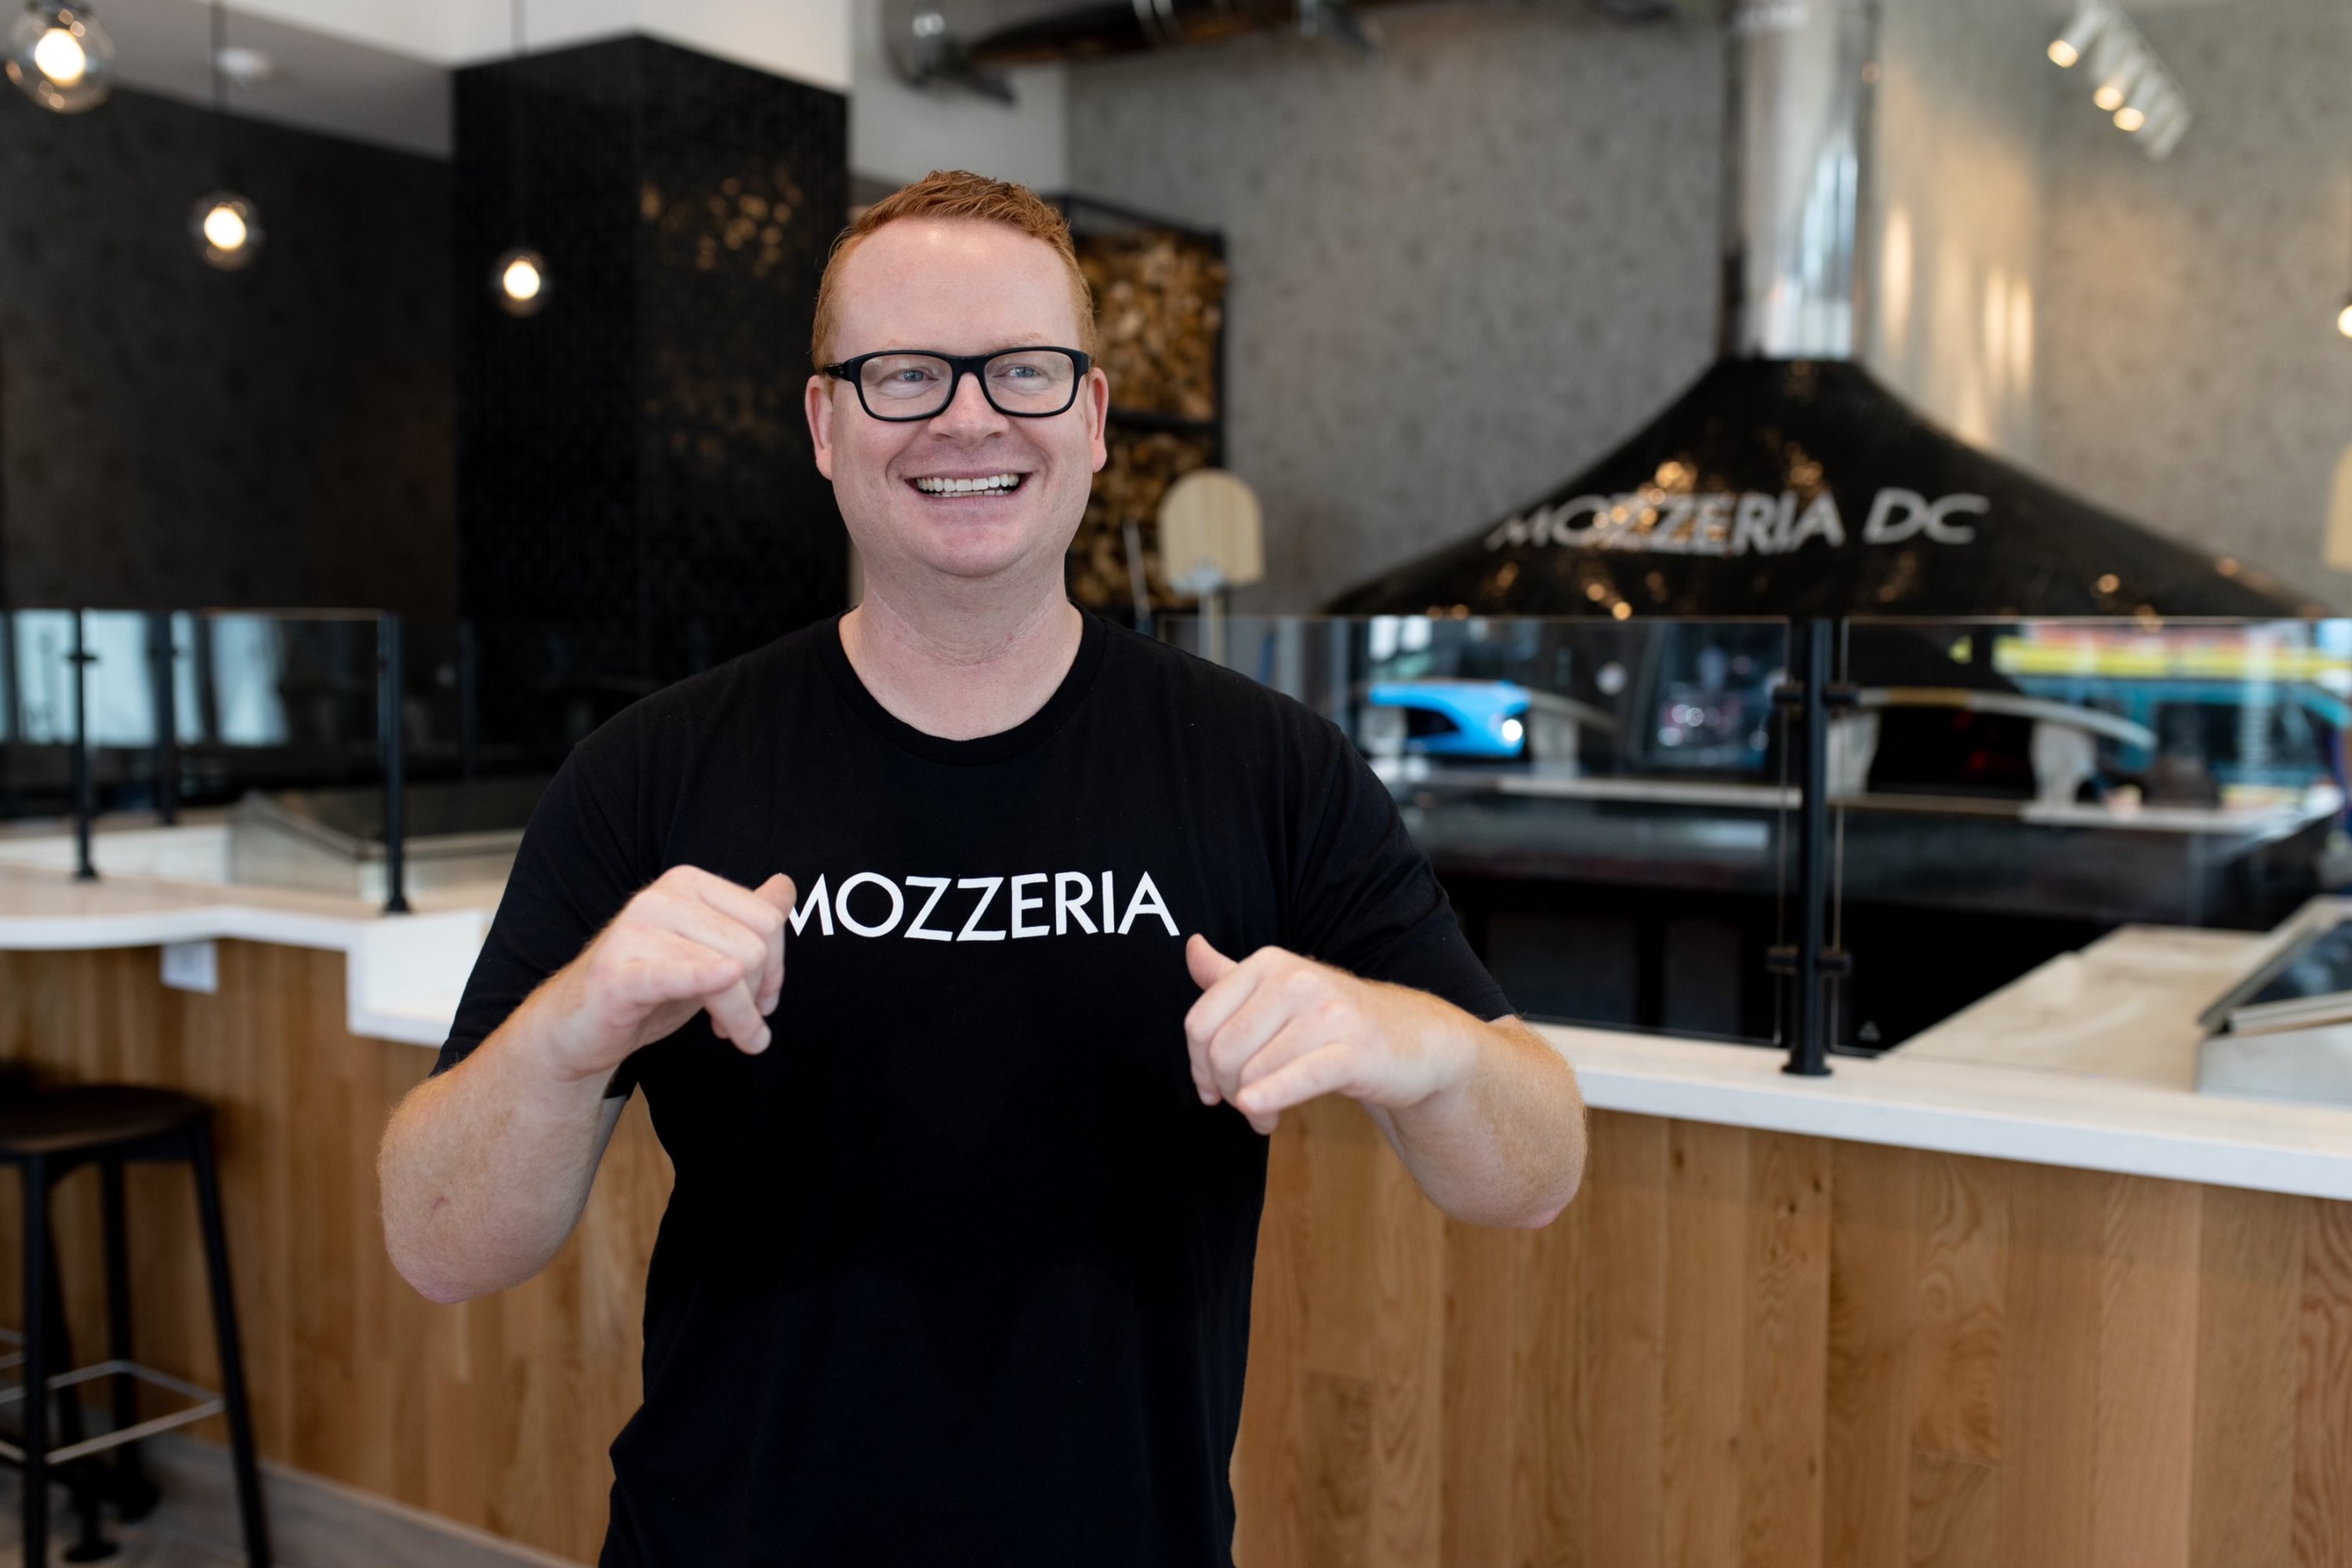 A man with ginger hair and rectangular glasses smiles at the camera. He is wearing a black shirt that says "Mozzeria" on it.